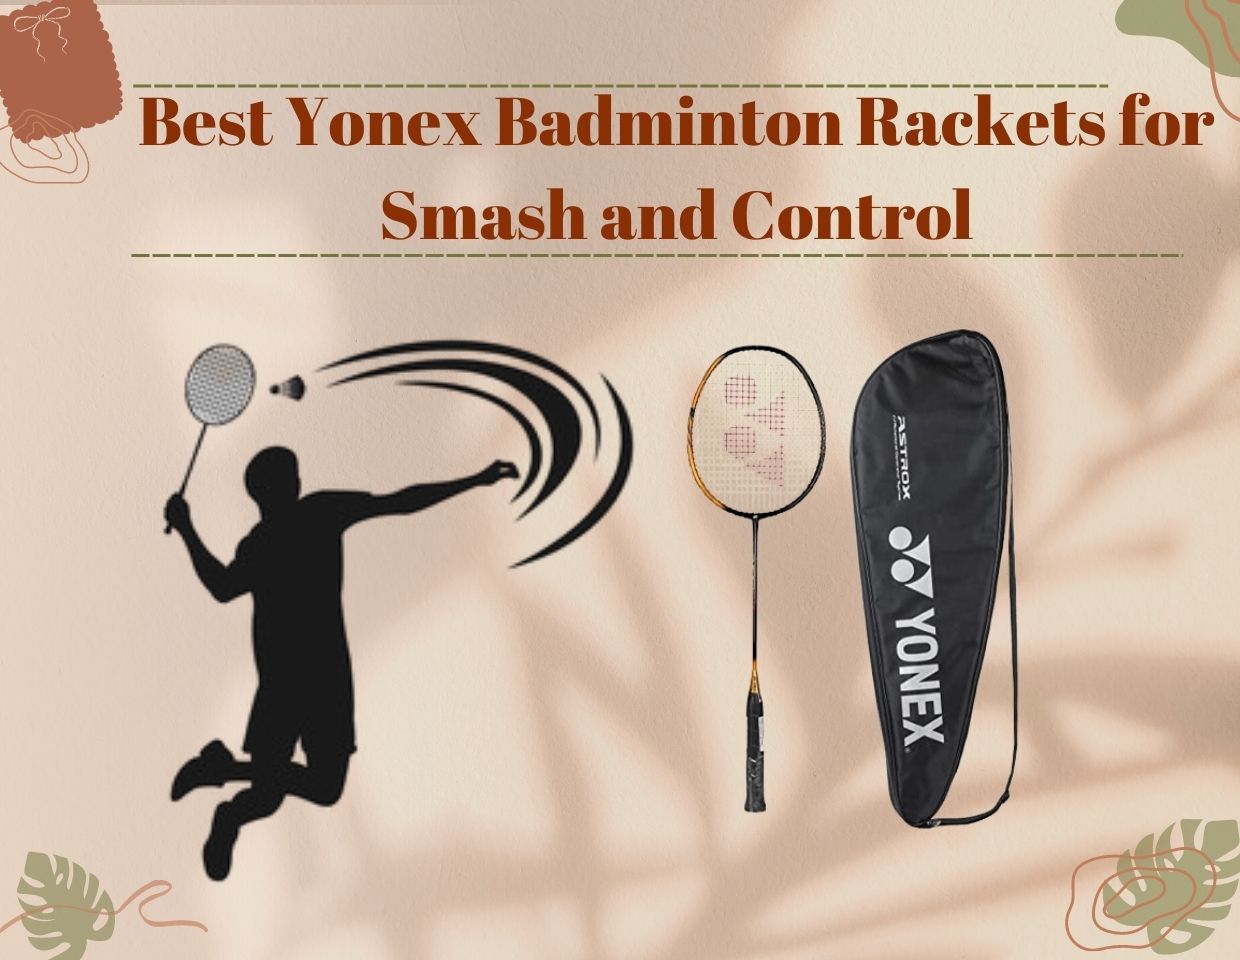 Best Yonex Badminton Rackets for Smash and Control Reviews